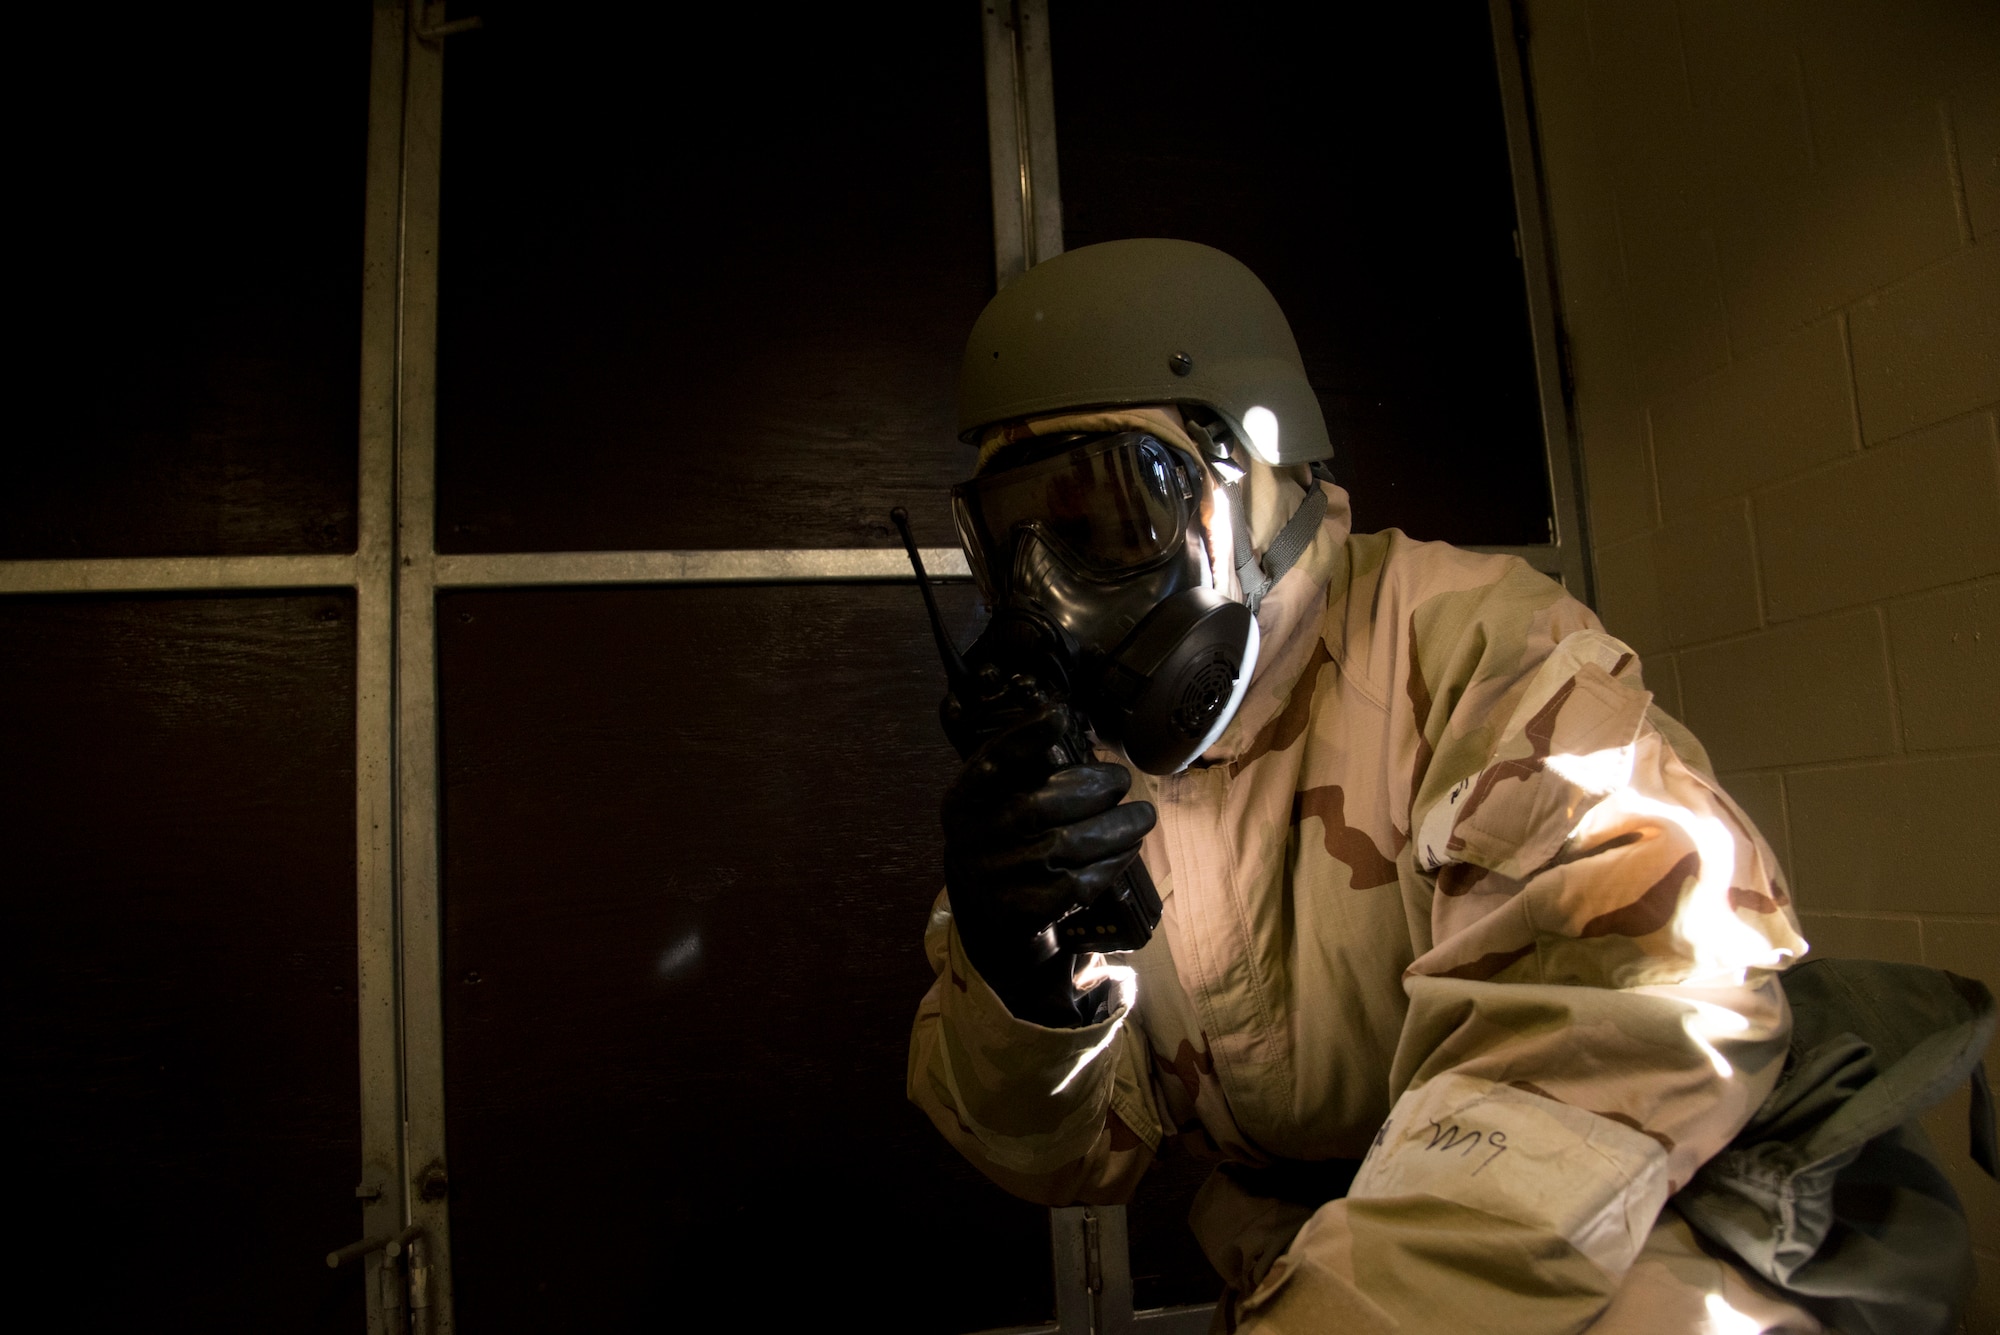 U.S. Air Force Tech. Sgt. Larry Prince Jr, the 6th Force Support Squadron NCO in charge of lodging,
practices command and control on the radio after a simulated chemical attack during an Ability to
Survive and Operate training exercise at MacDill Air Force Base, Fla., Dec. 6, 2018. ATSO training
refreshes skills necessary for Airmen to accomplish their mission in austere conditions.